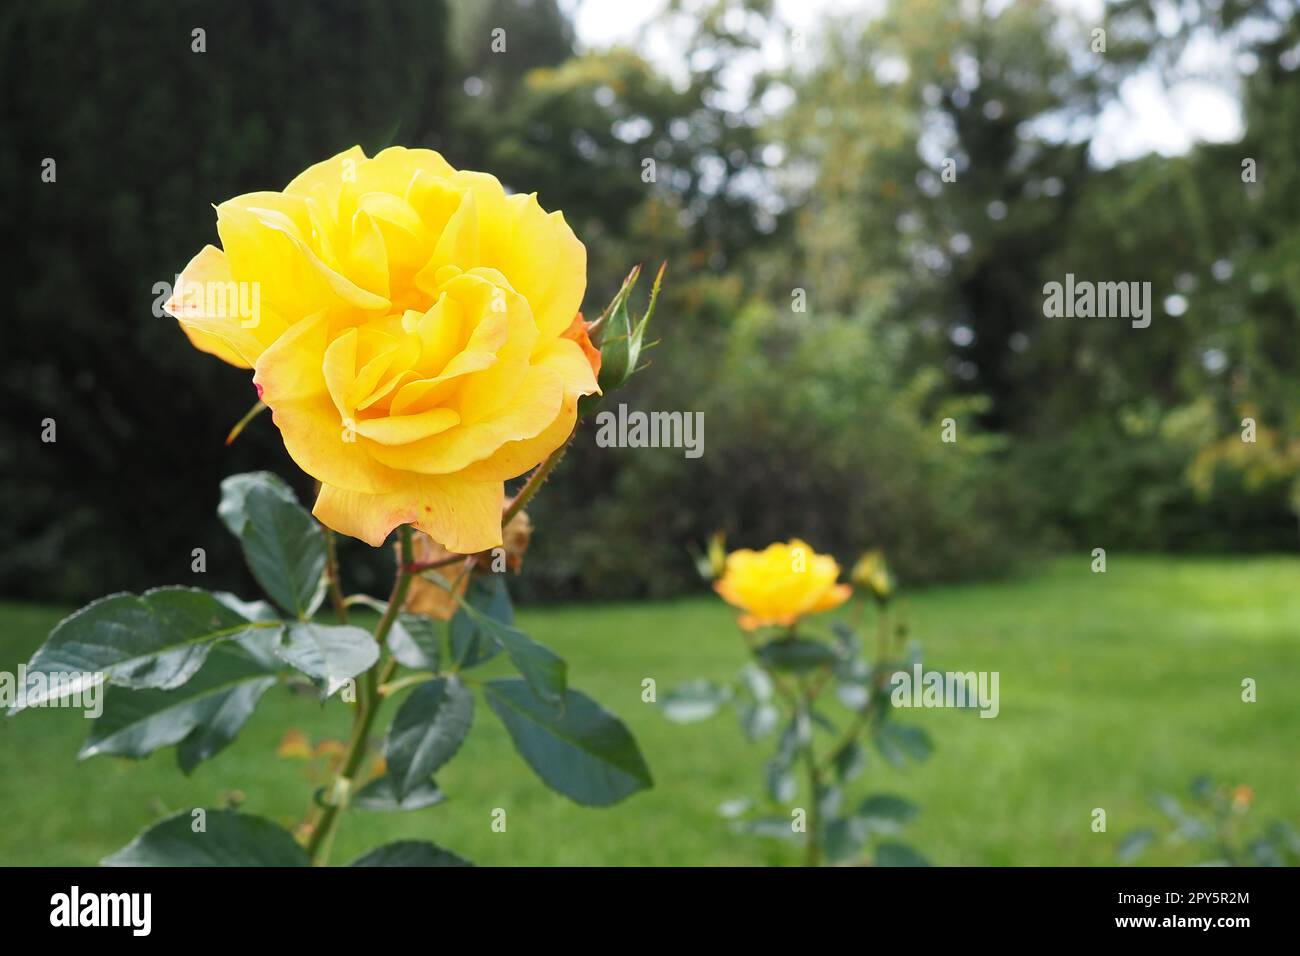 Yellow roses in the garden or park. Banja Koviljaca, Serbia. A bush of yellow hybrid tea roses as a decoration in landscape design. Floriculture and gardening as a hobby. Stock Photo